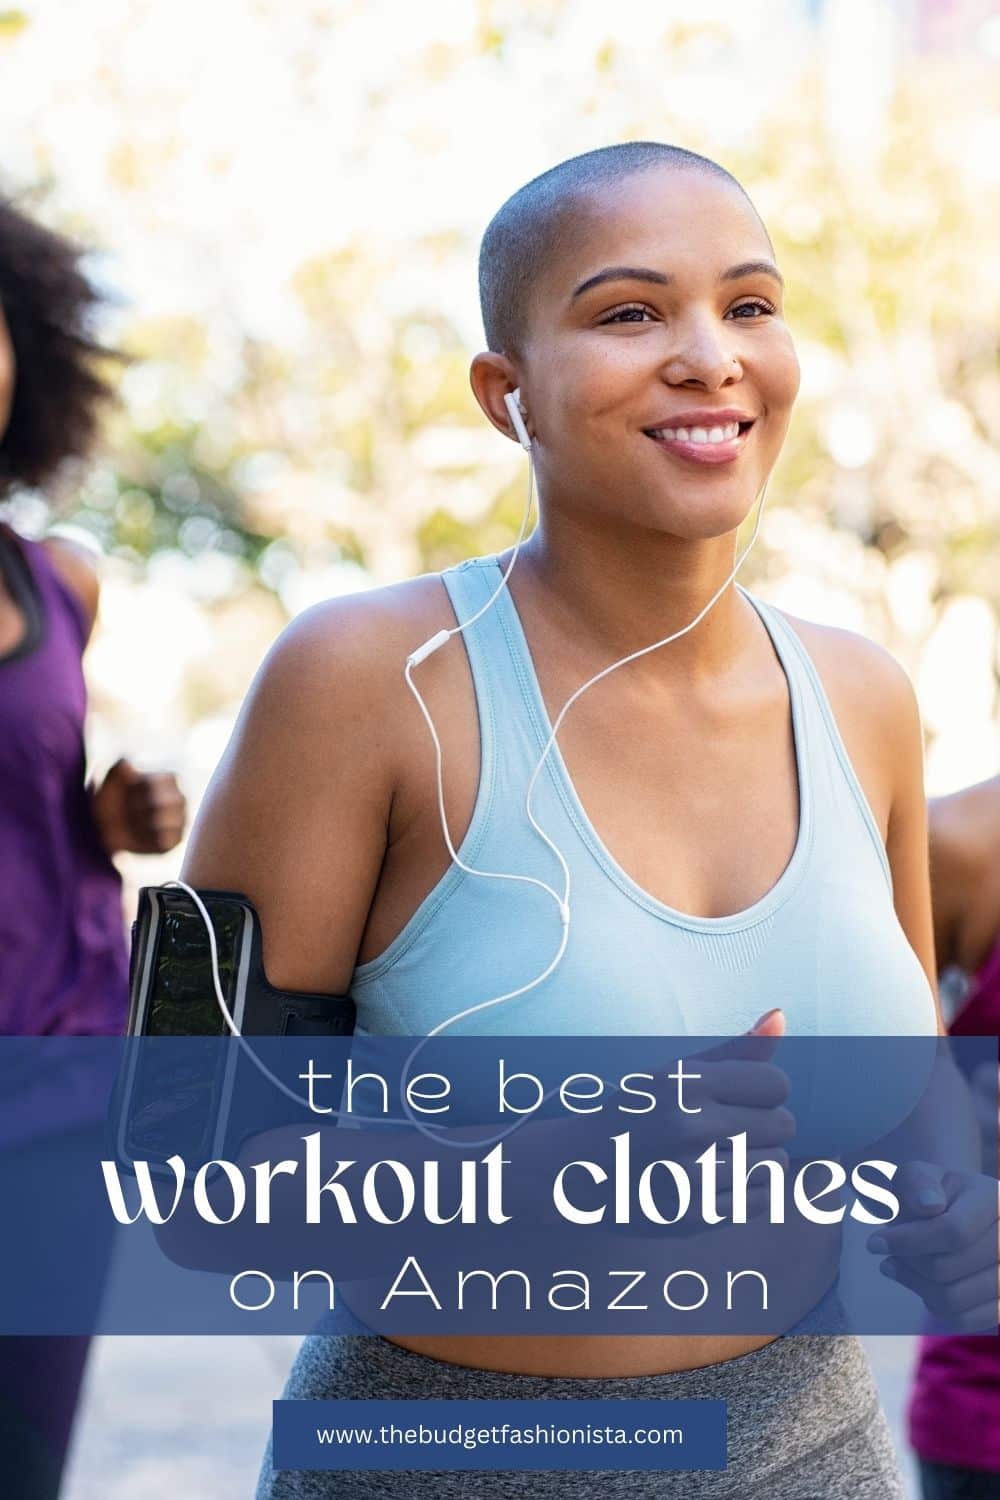 Three women jogging outside with text overlay that reads, the best workout clothes on Amazon.